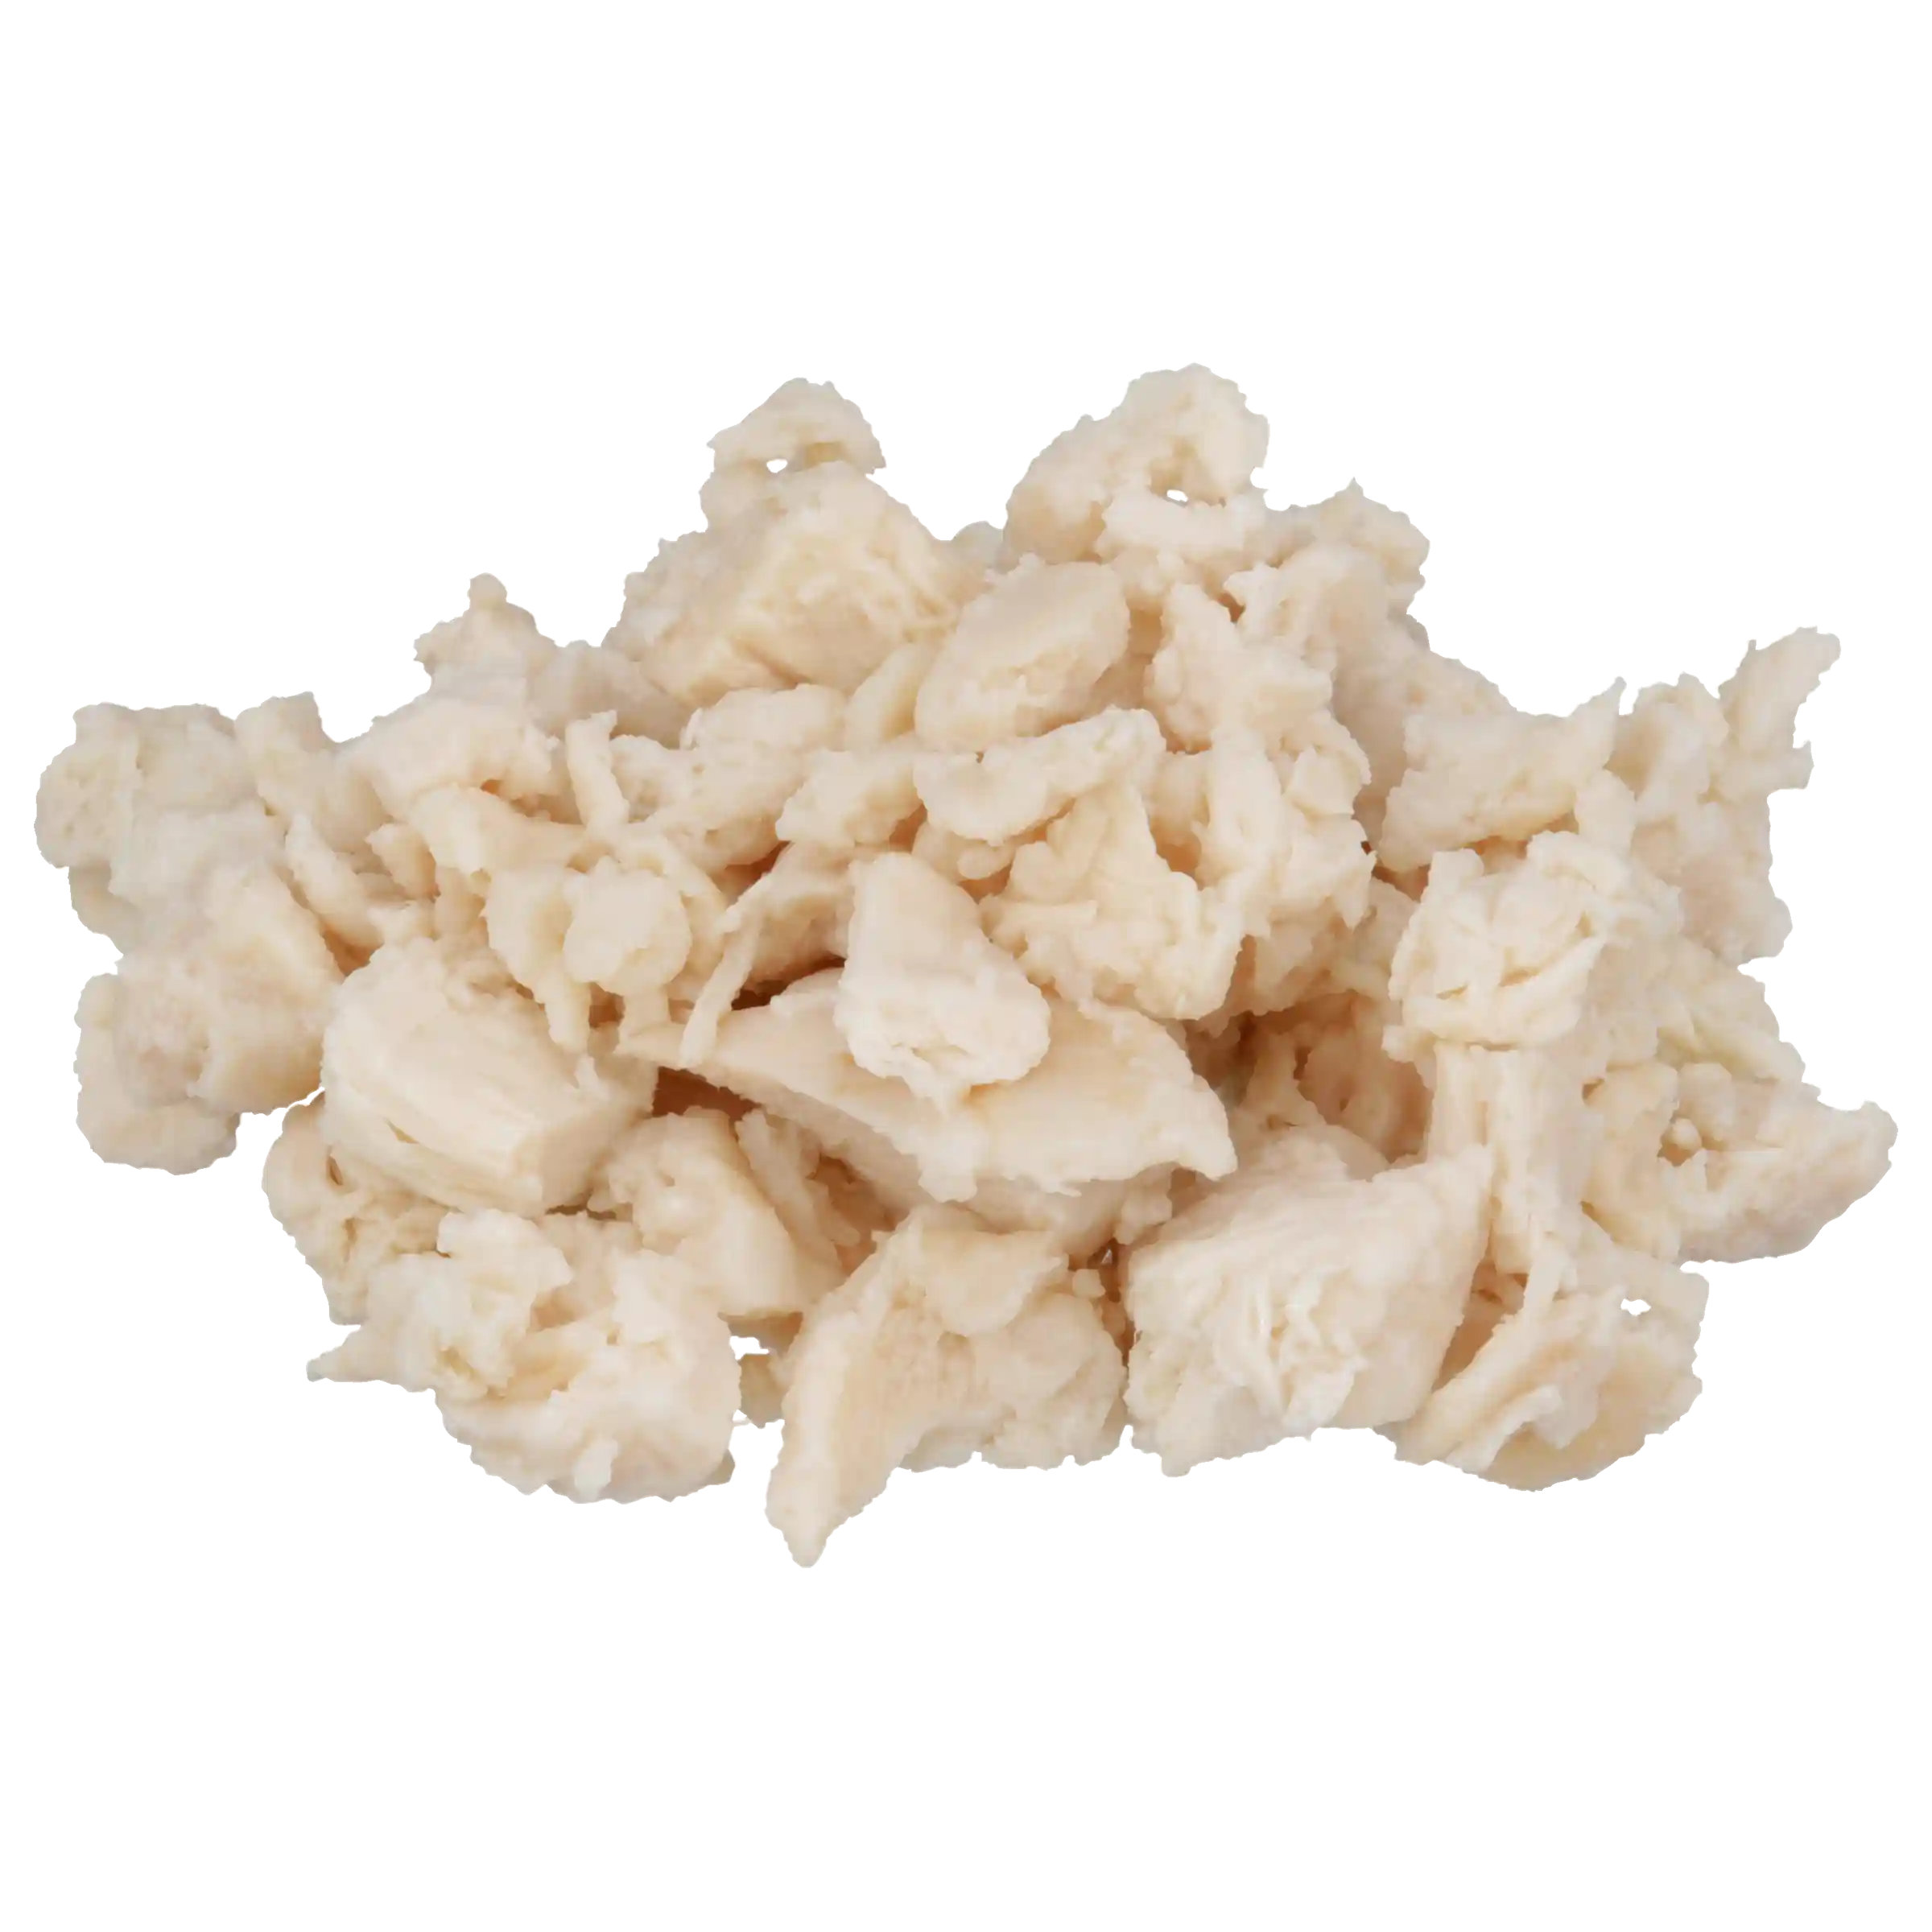 Tyson® Fully Cooked All Natural* Low Sodium Diced Chicken Breast, 0.5"_image_21